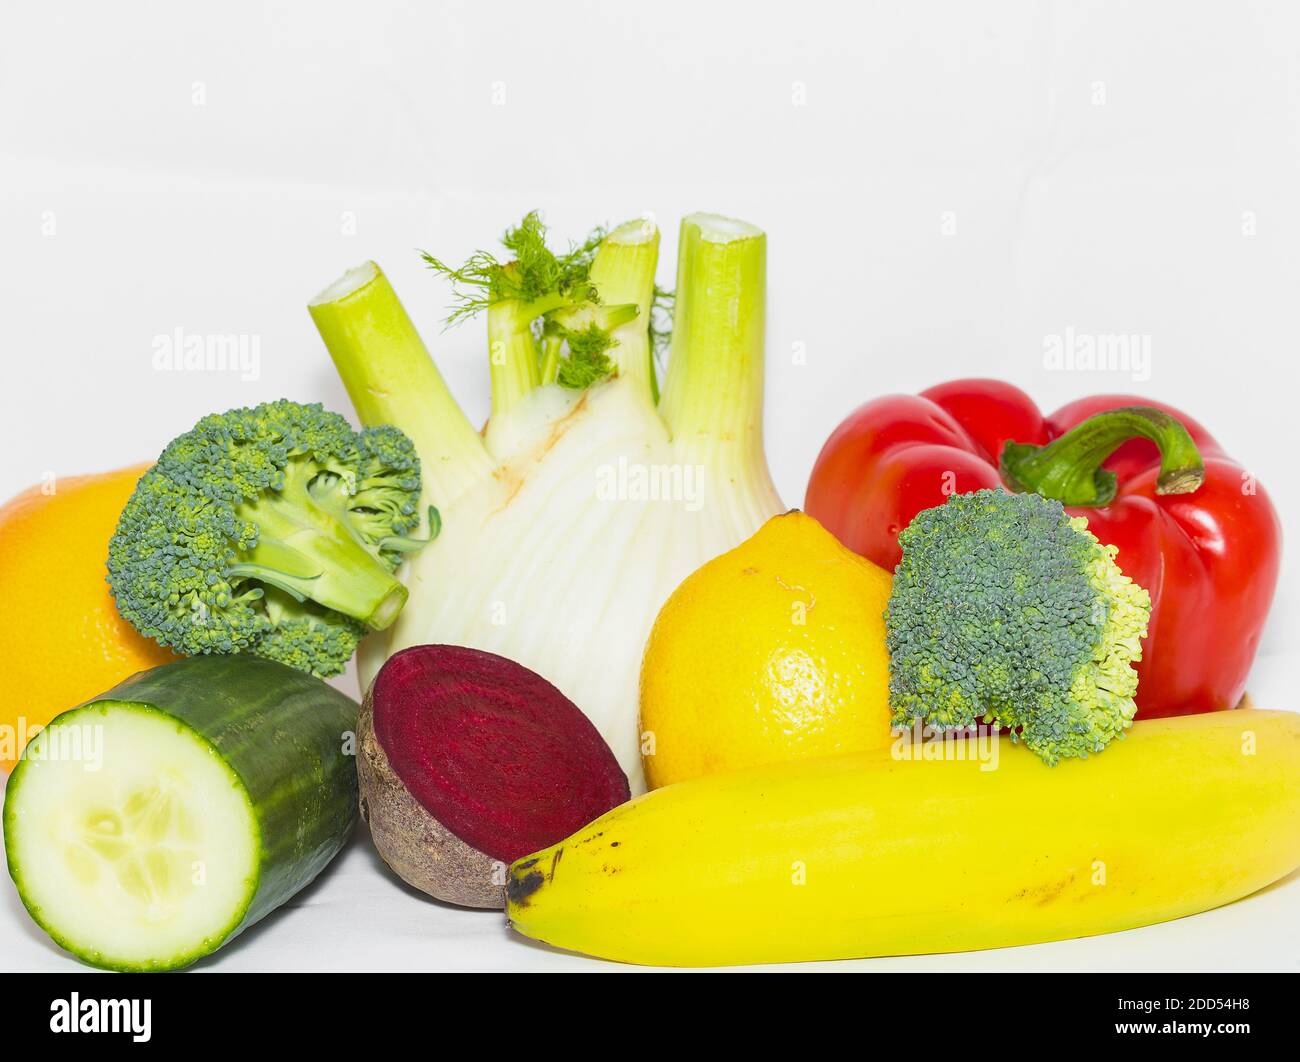 A pile of various fruits and vegetables on white background. Macro photography Stock Photo